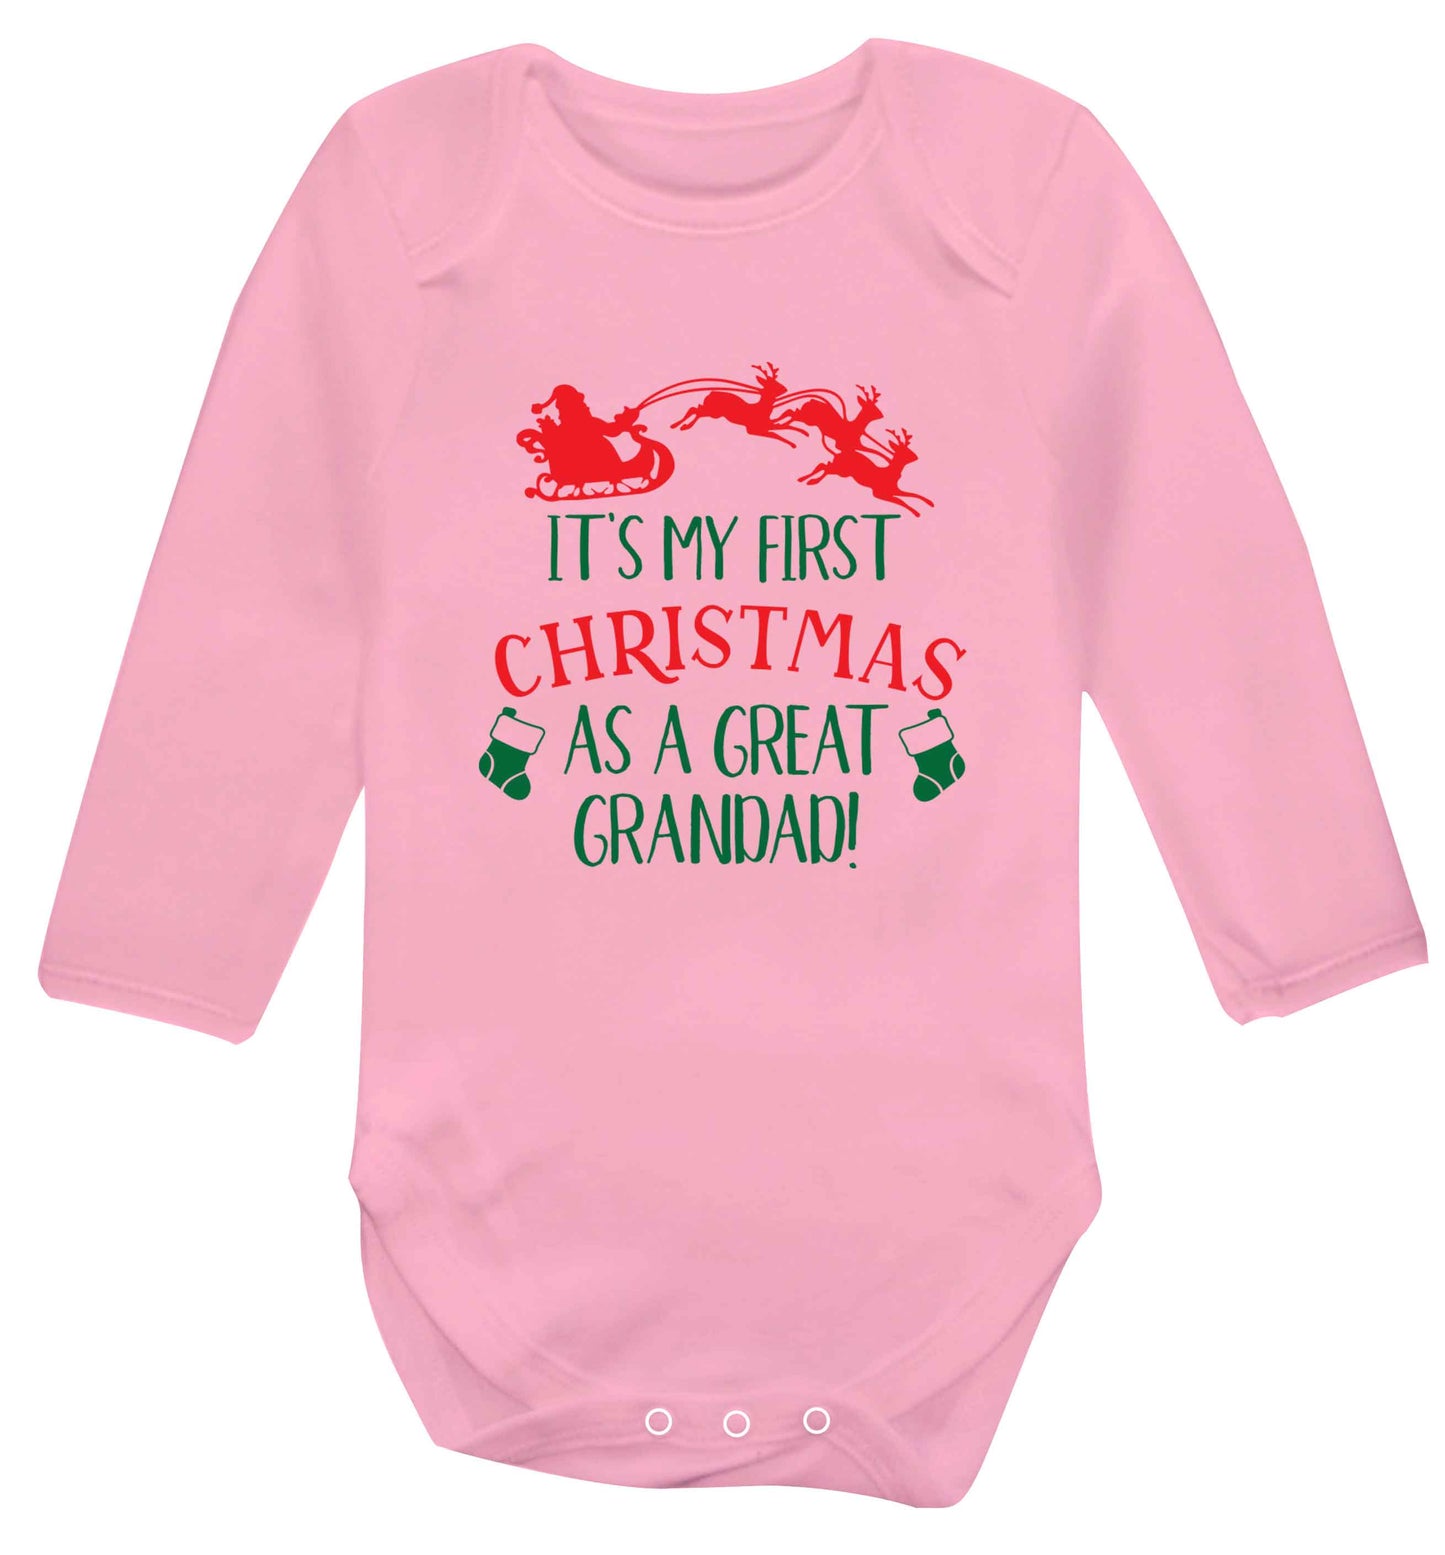 It's my first Christmas as a great grandad! Baby Vest long sleeved pale pink 6-12 months